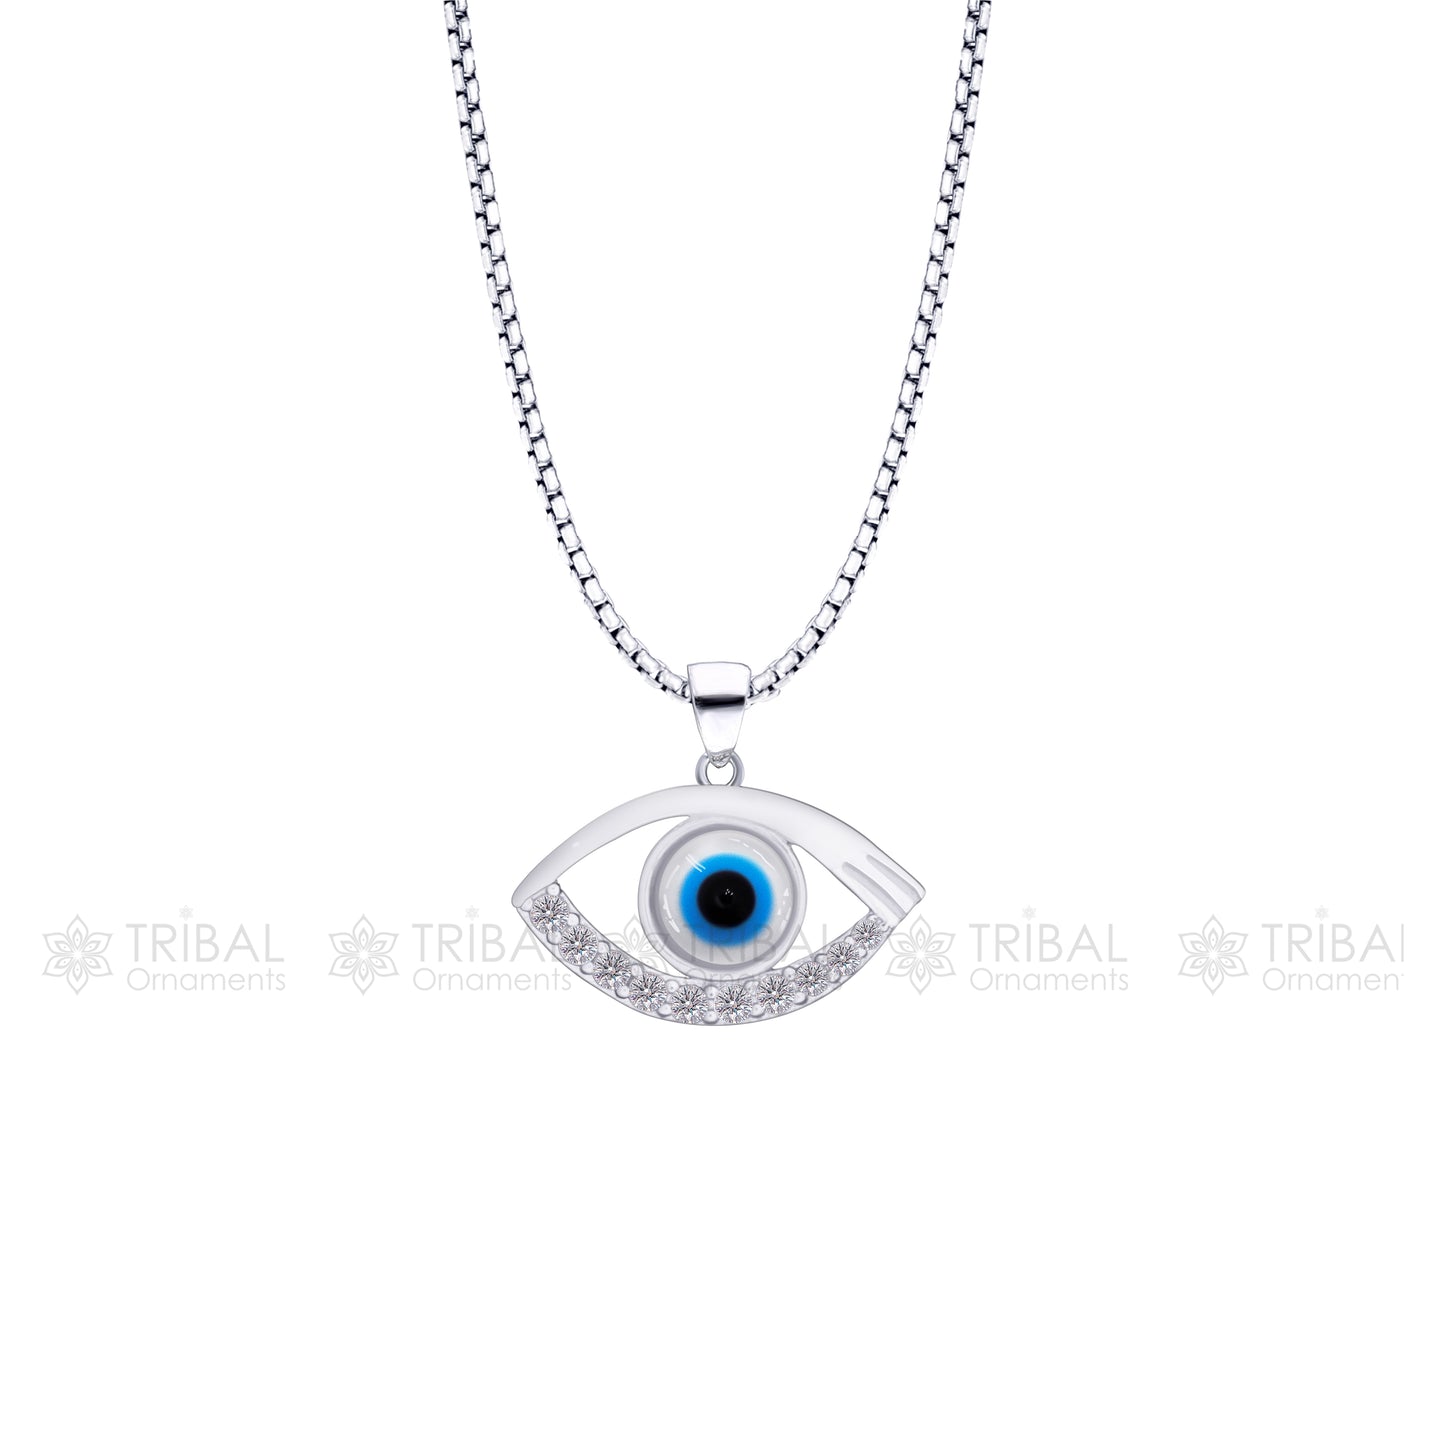 PURE 925 sterling silver evil eyes pendant with CZ stone nsp795